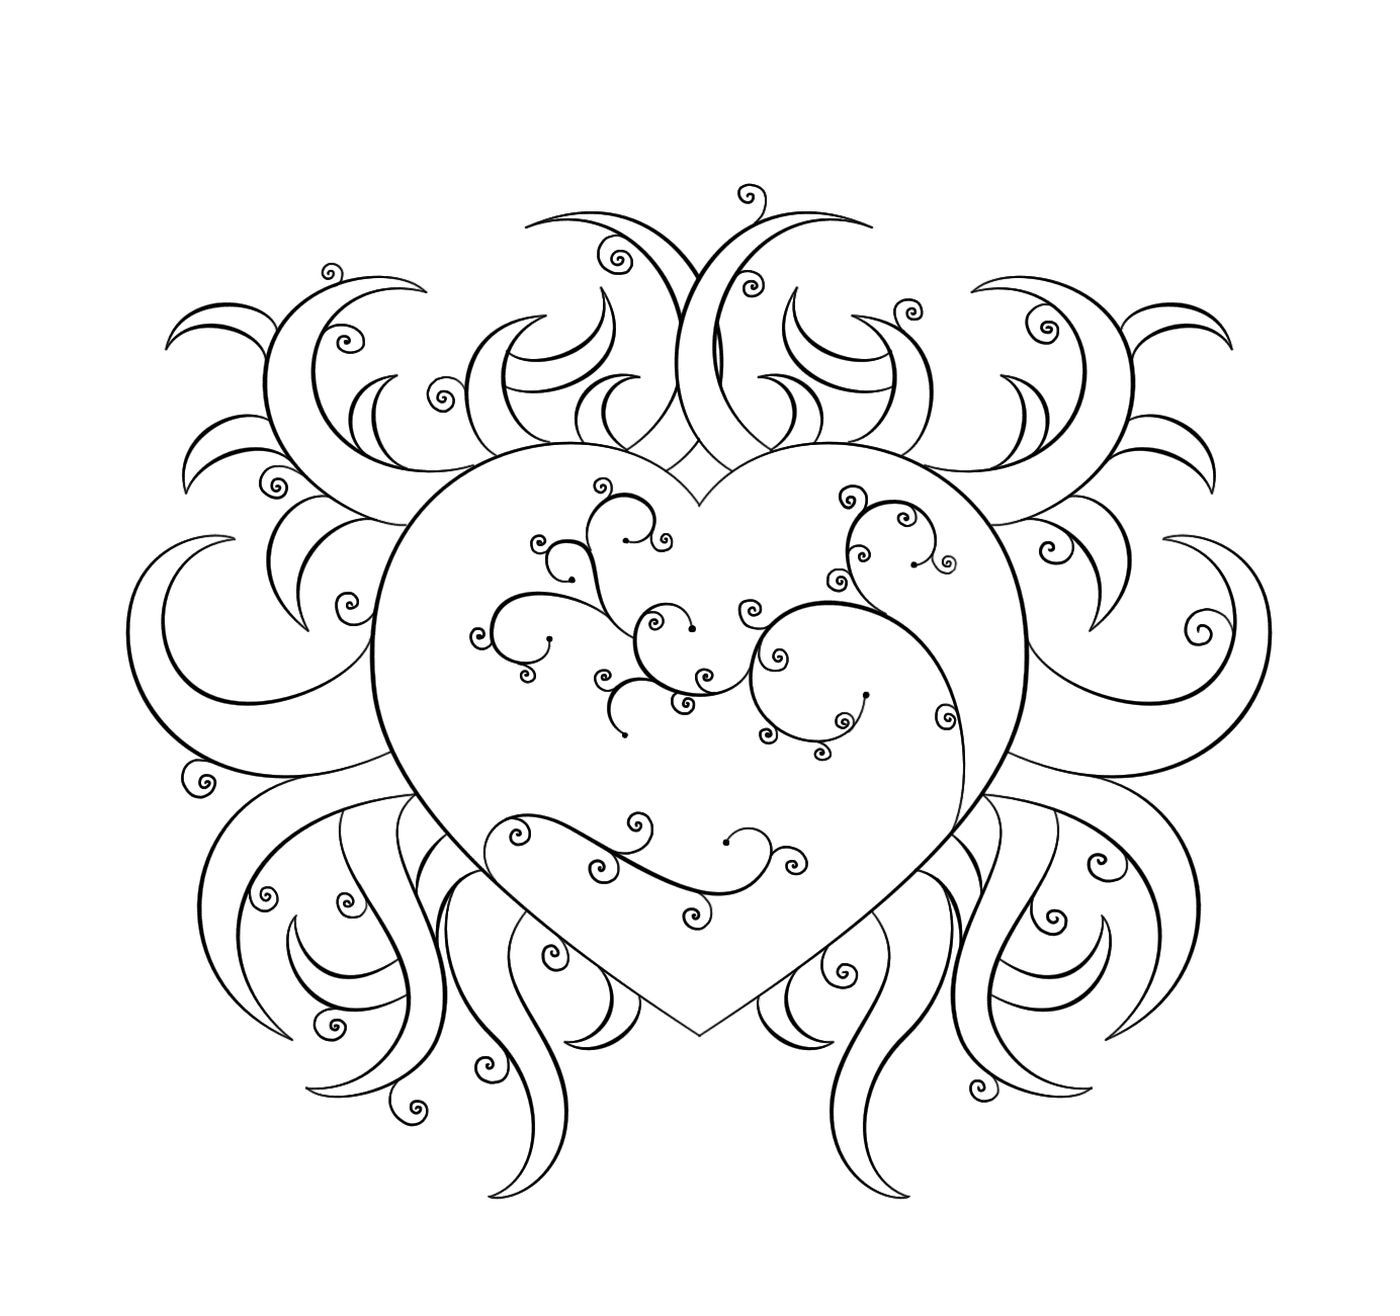  Heart adorned with beautiful whirlpool shapes 